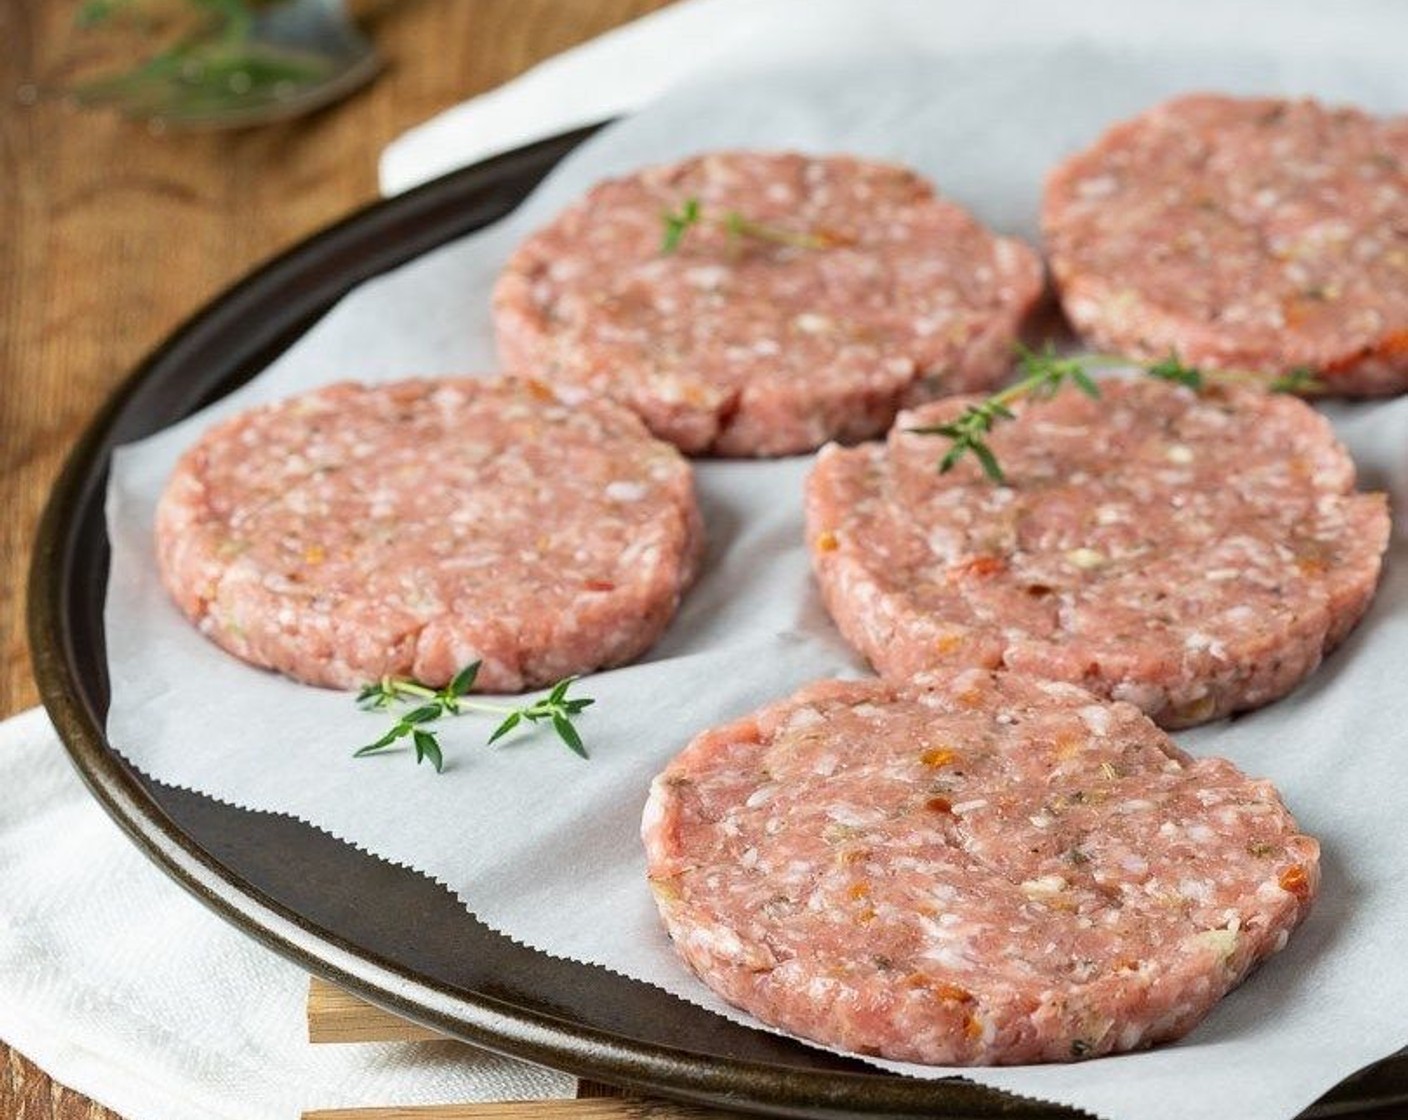 step 4 Portion mixture into 2.5 ounces each. Form into 3 1/2-inch patties either using your hands or pressing into a ring mold. Place on a flat plate or tray and separate layers with parchment.